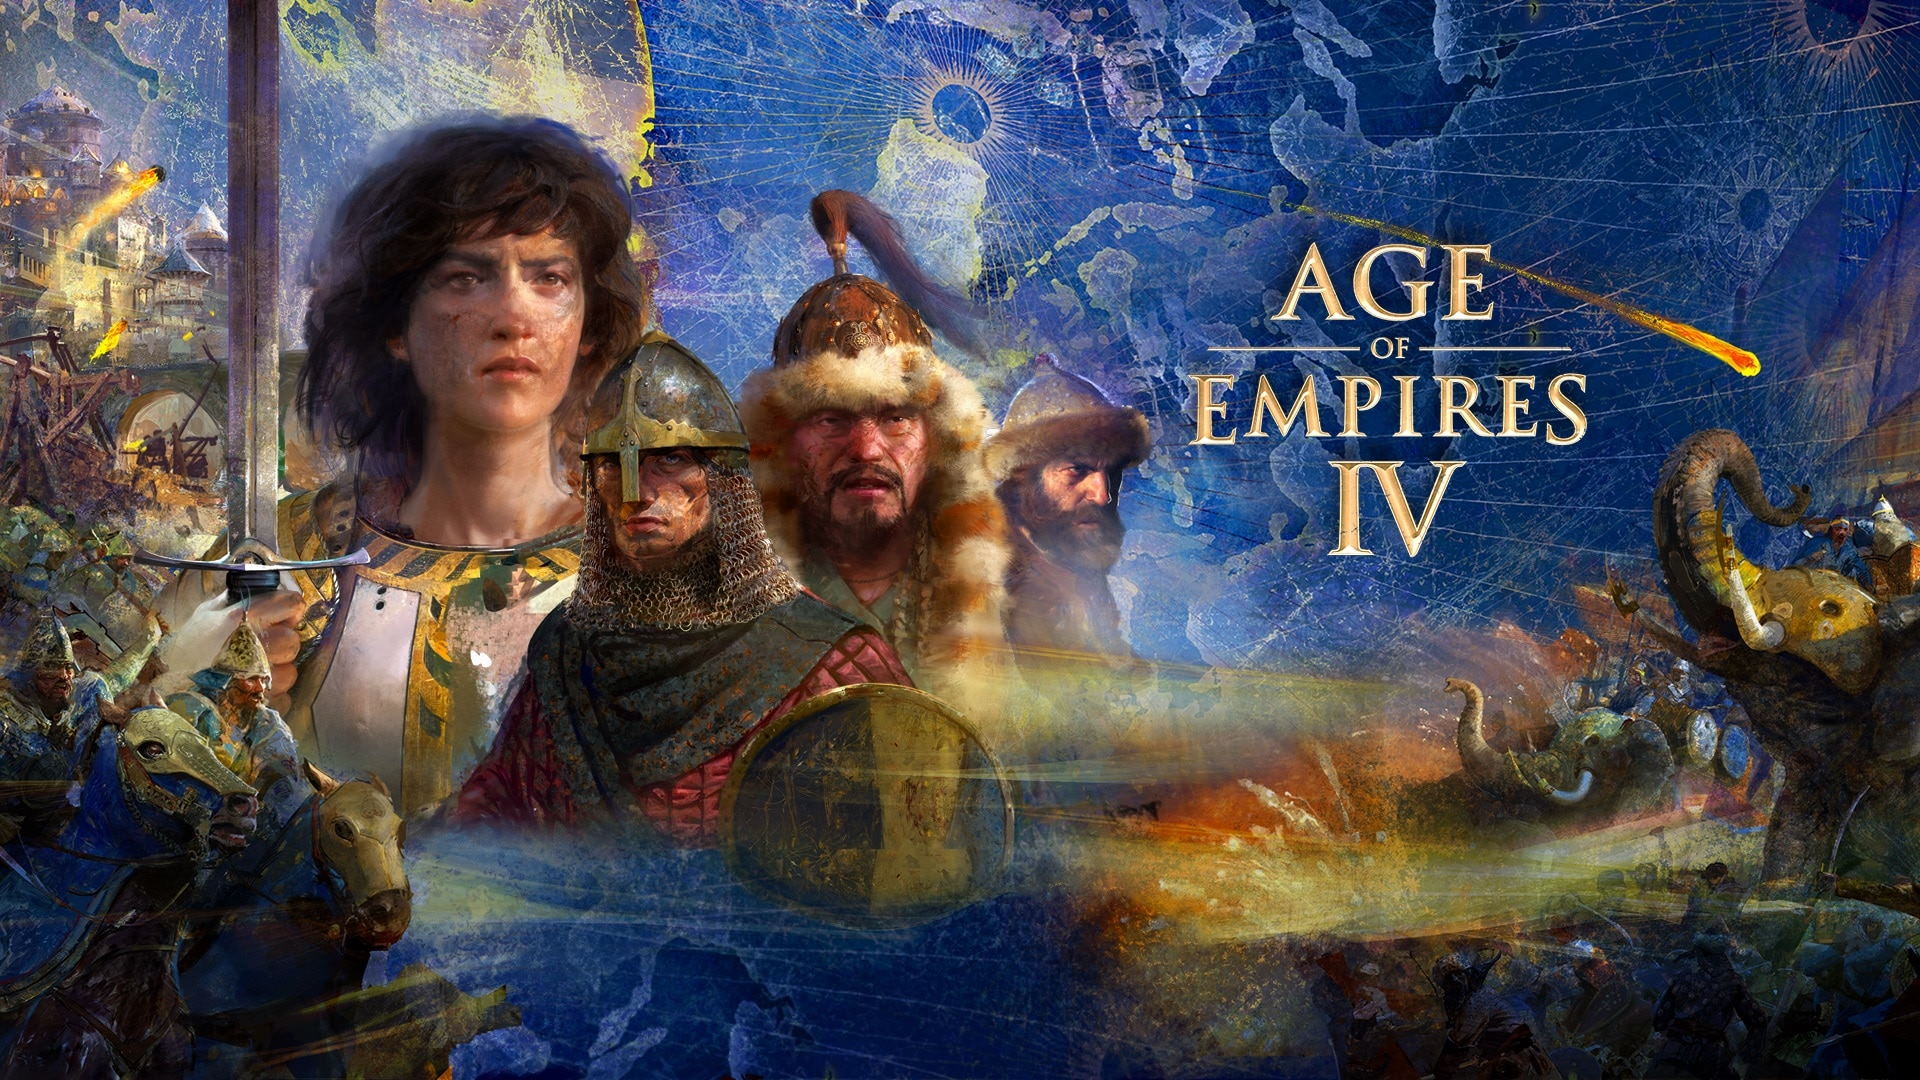 Age-of-Empires-IV-Title.jpg